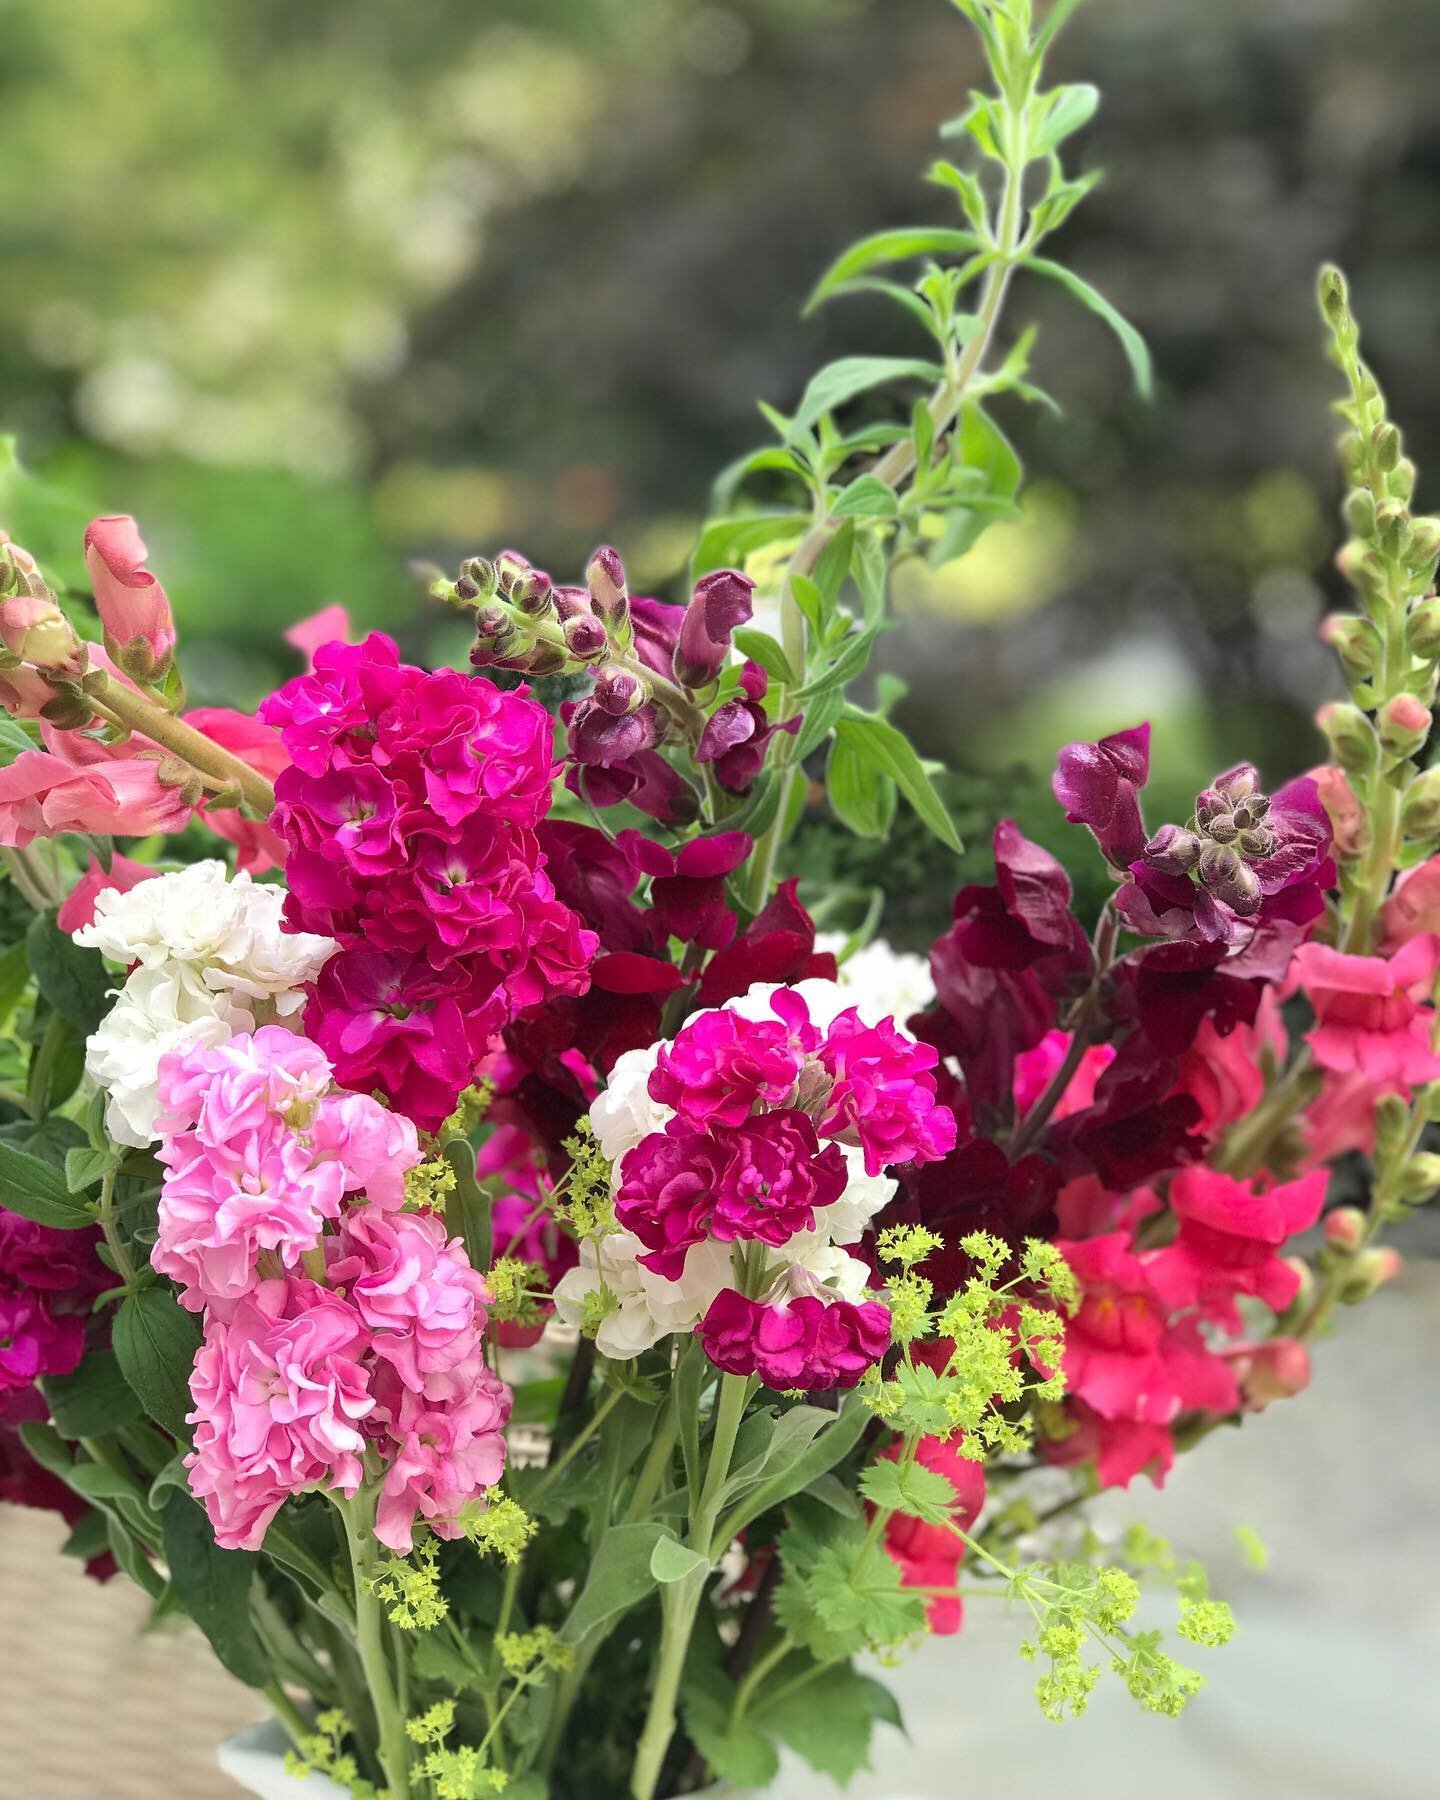 Summer bounty from @unityfarmvt - snapdragons, stock, and mint with lady&rsquo;s mantle added from my home garden... looks like a raspberry sundae and smells divine. Thanks to the hardworking ladies who grew these from seed or plugs, tended and broug